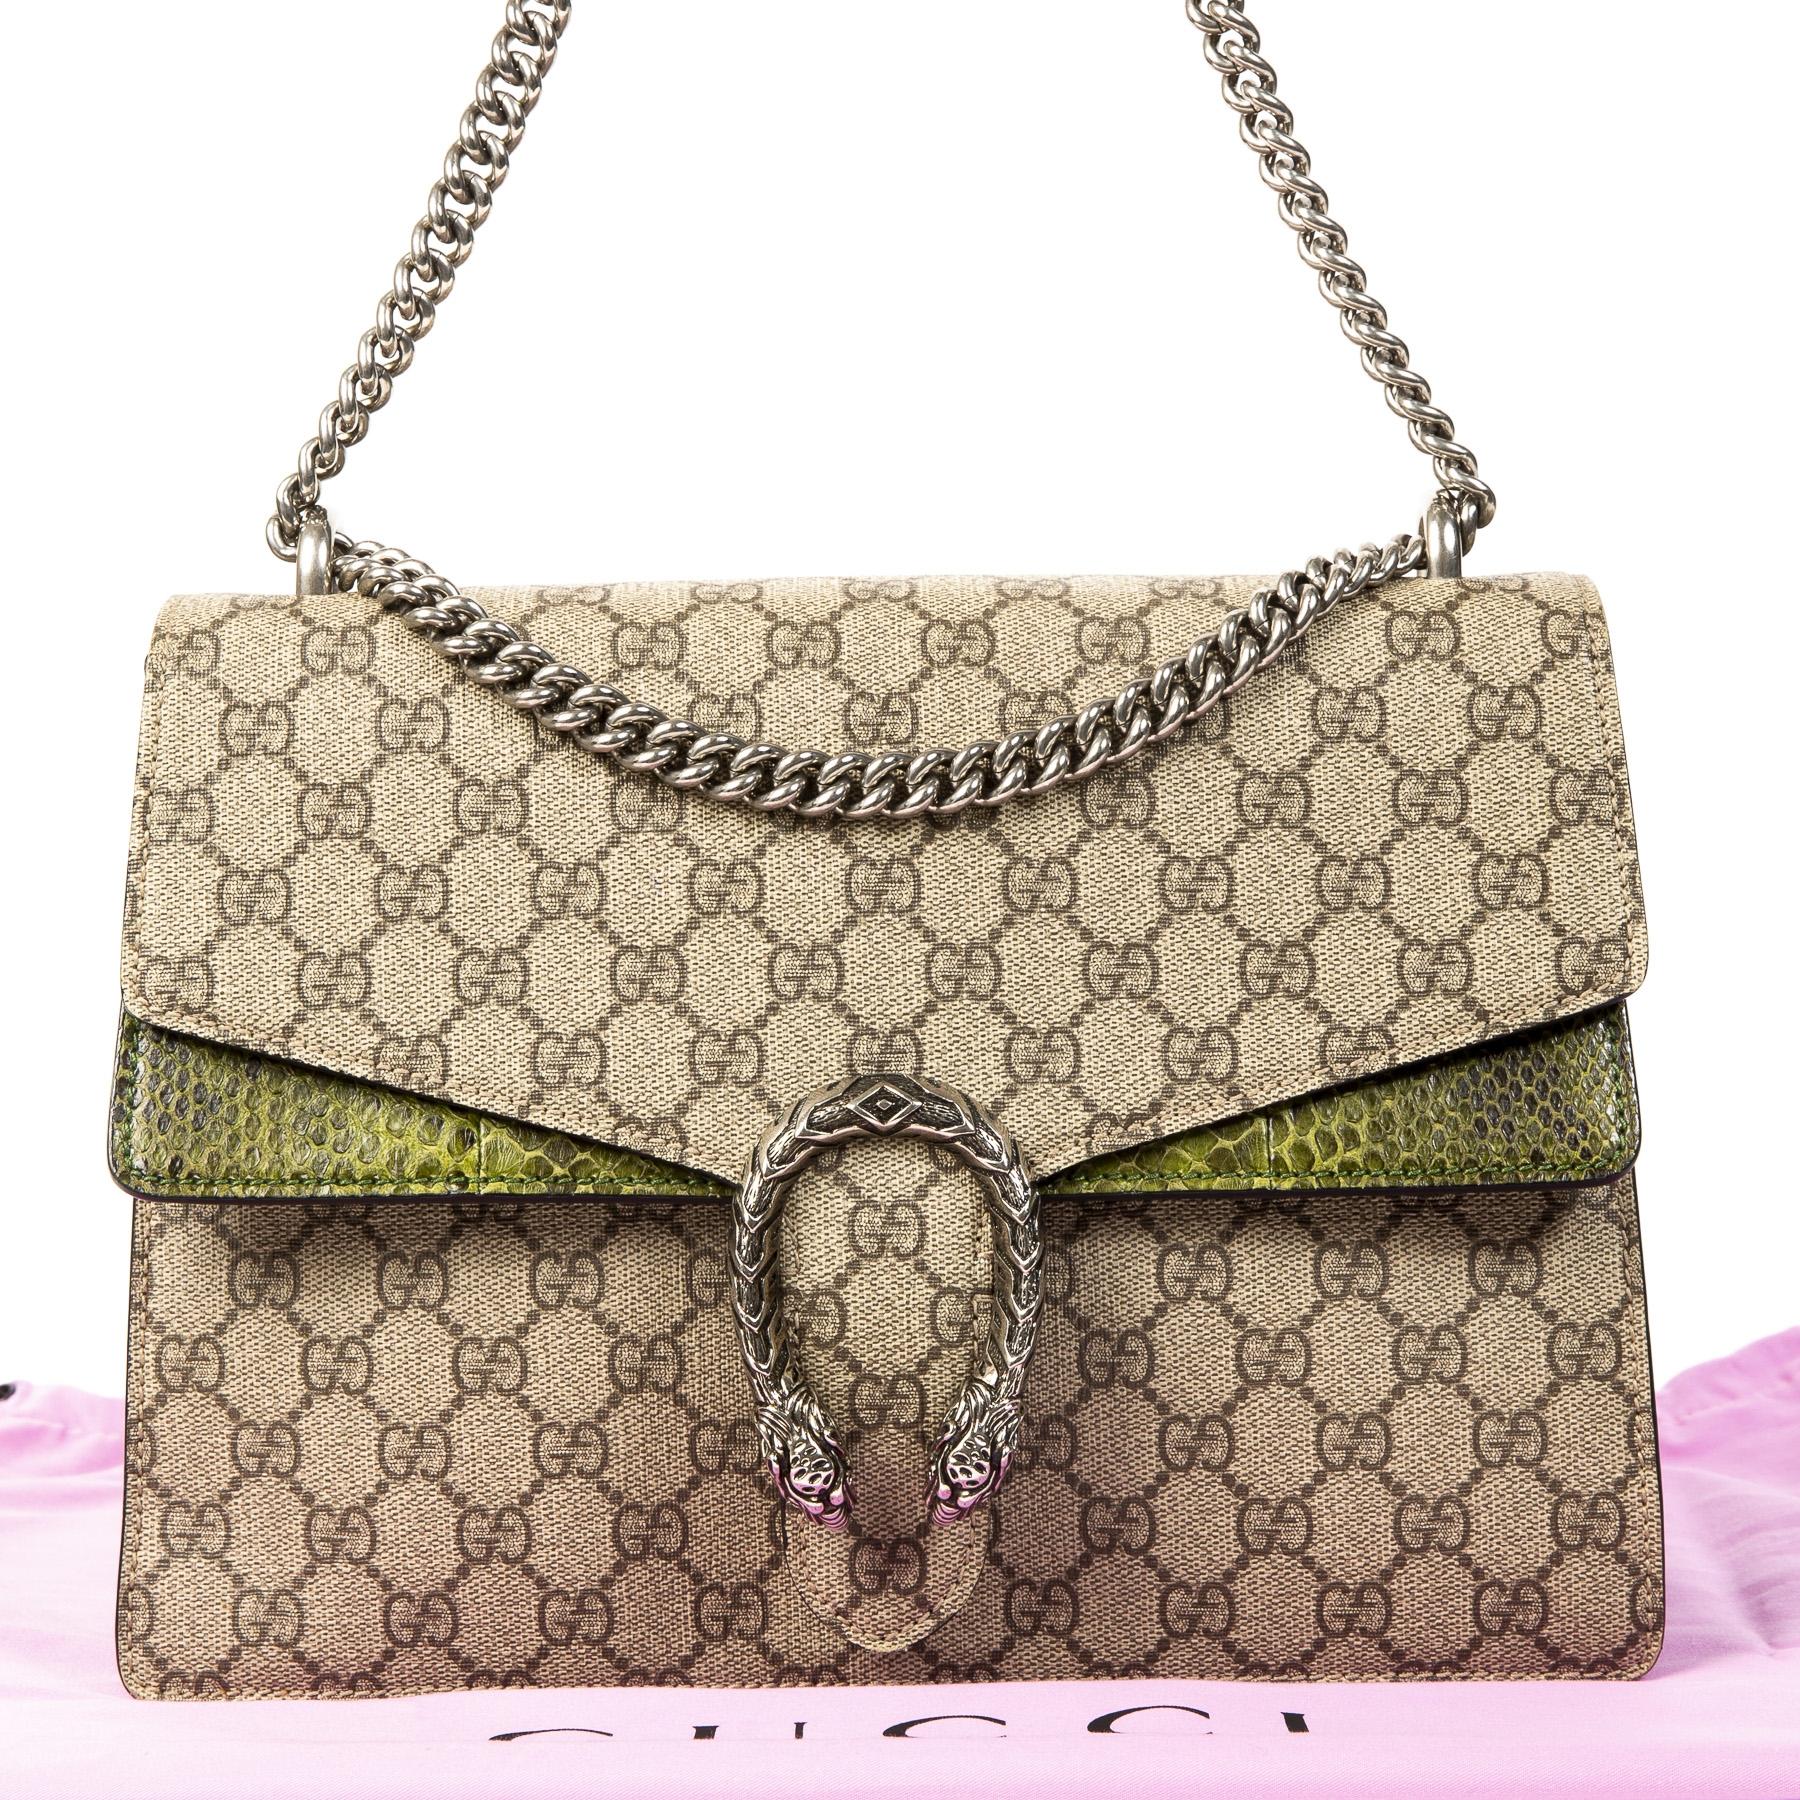 Very good preloved condition

Gucci GG Supreme Monogram Python Dionysus

This very special Gucci Dionysus comes in the iconic Supreme Monogram pattern and is finished with dark green python leather The bag features the famous horseshoe closure with